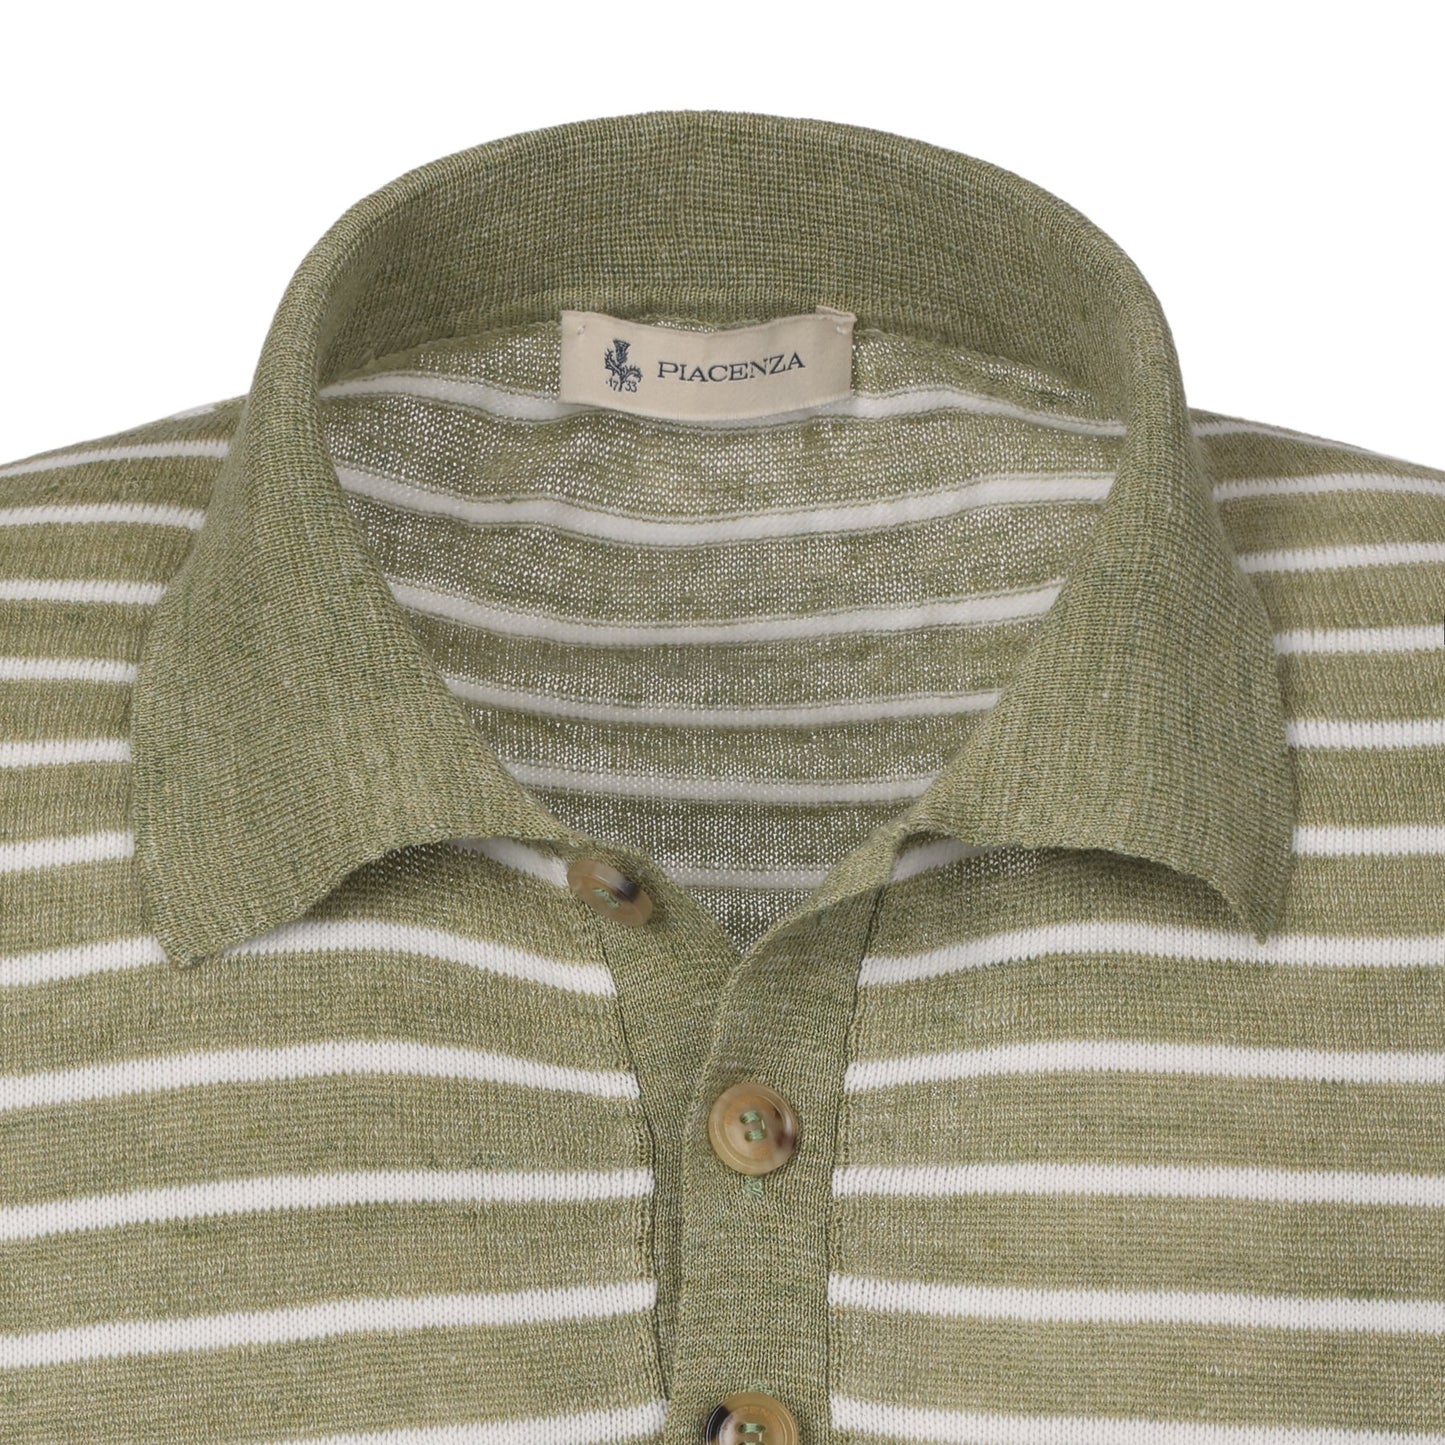 Piacenza Cashmere Striped Cotton - Blend Polo Shirt in Olive Green and White - SARTALE